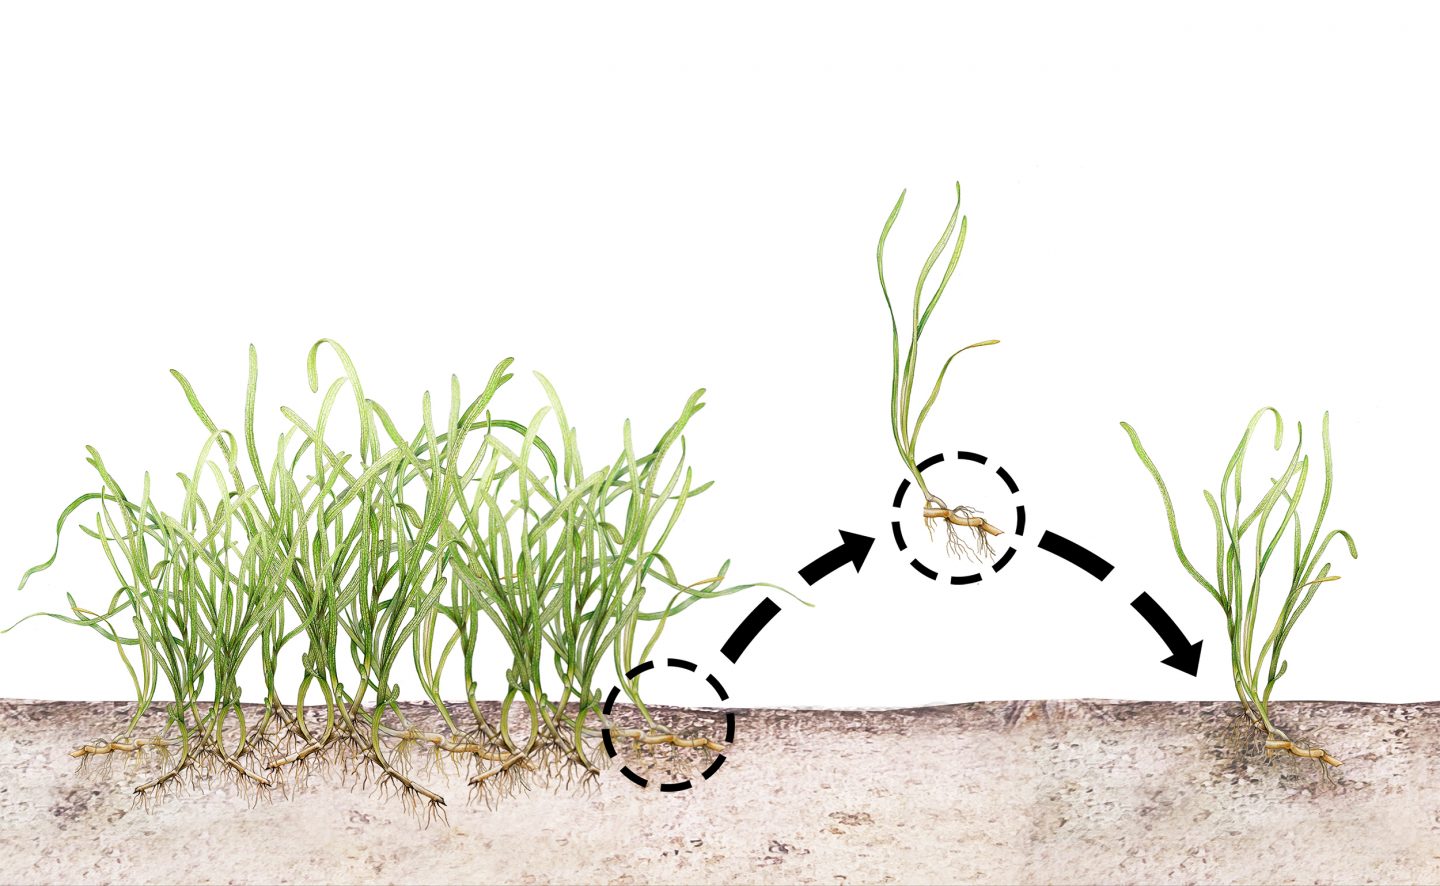 Transplantation is the most common method for restoring seagrasses